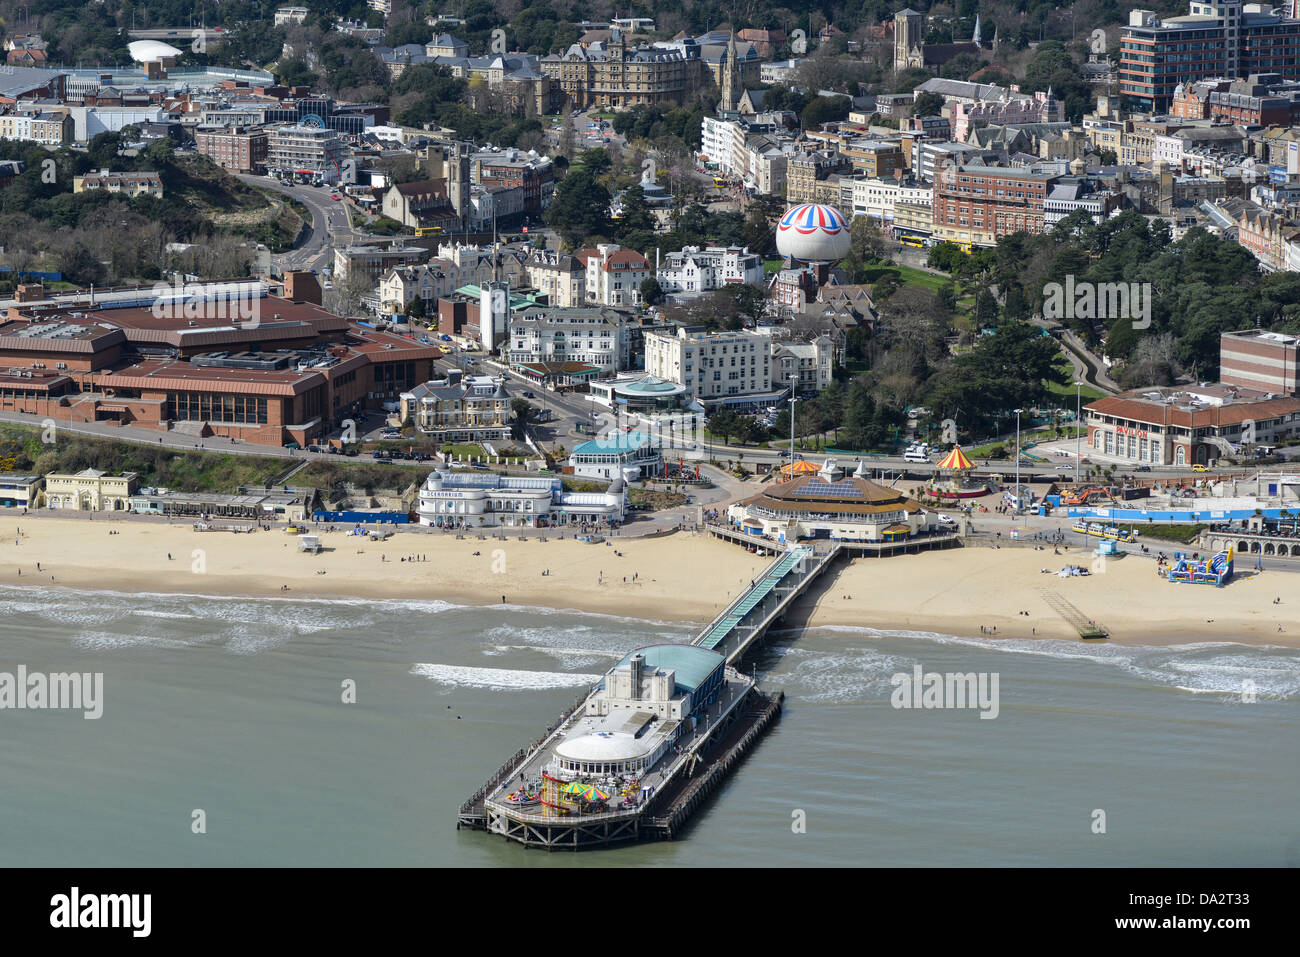 Aerial photograph of Bournemouth Pier Stock Photo